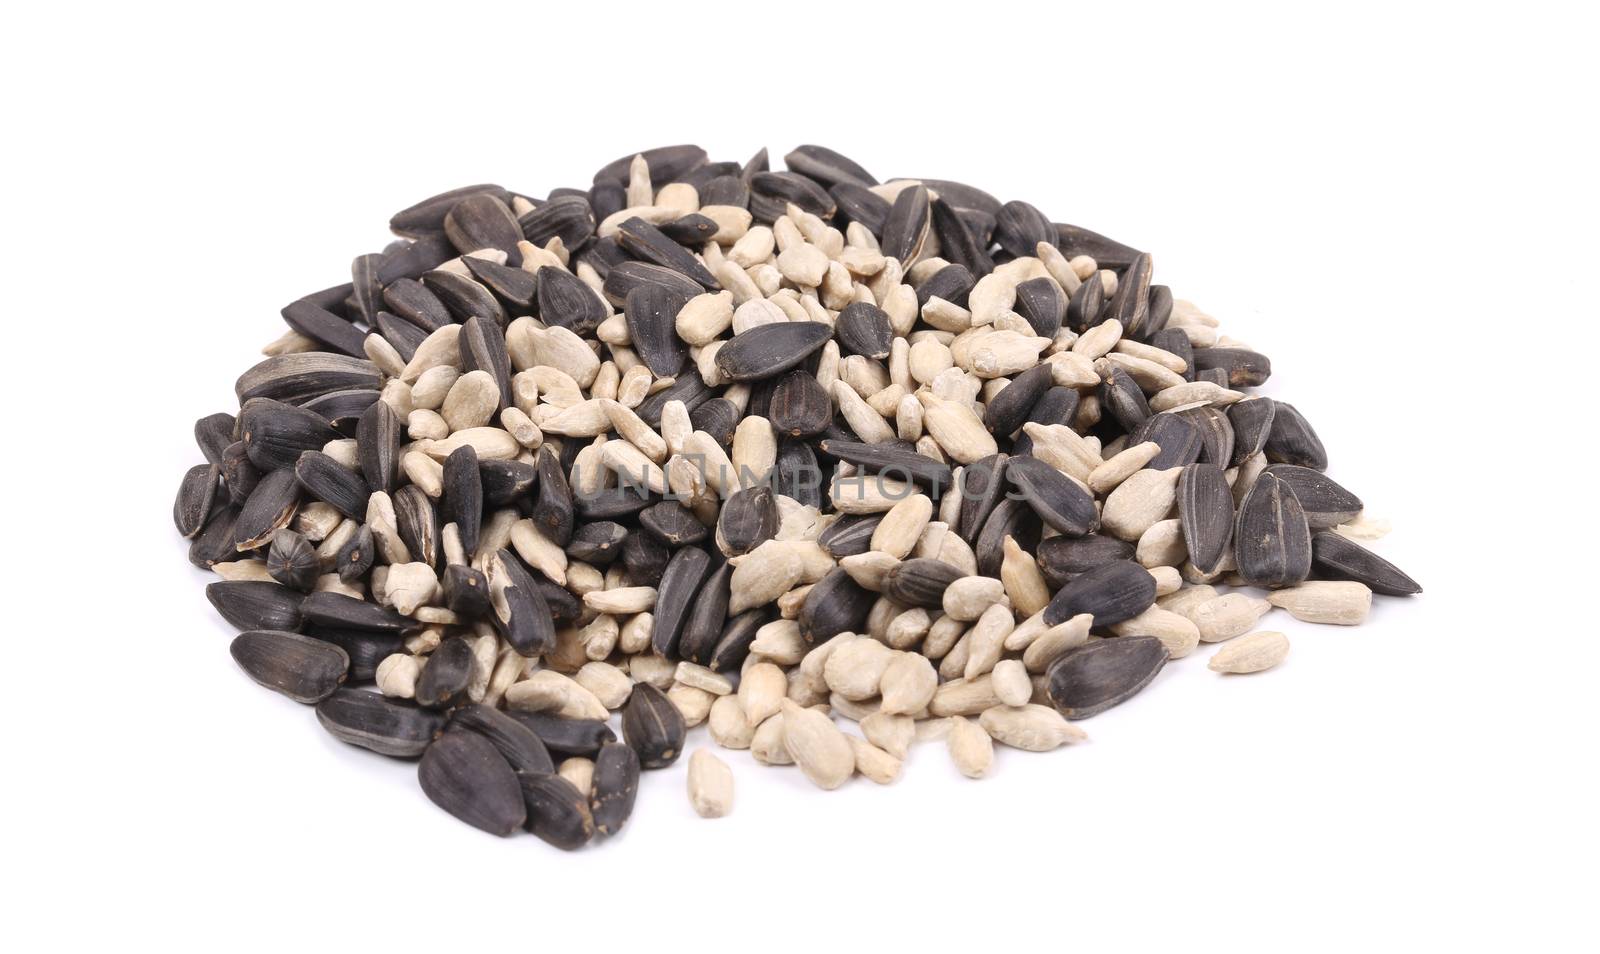 Bunch of white and black sunflower seeds. by indigolotos